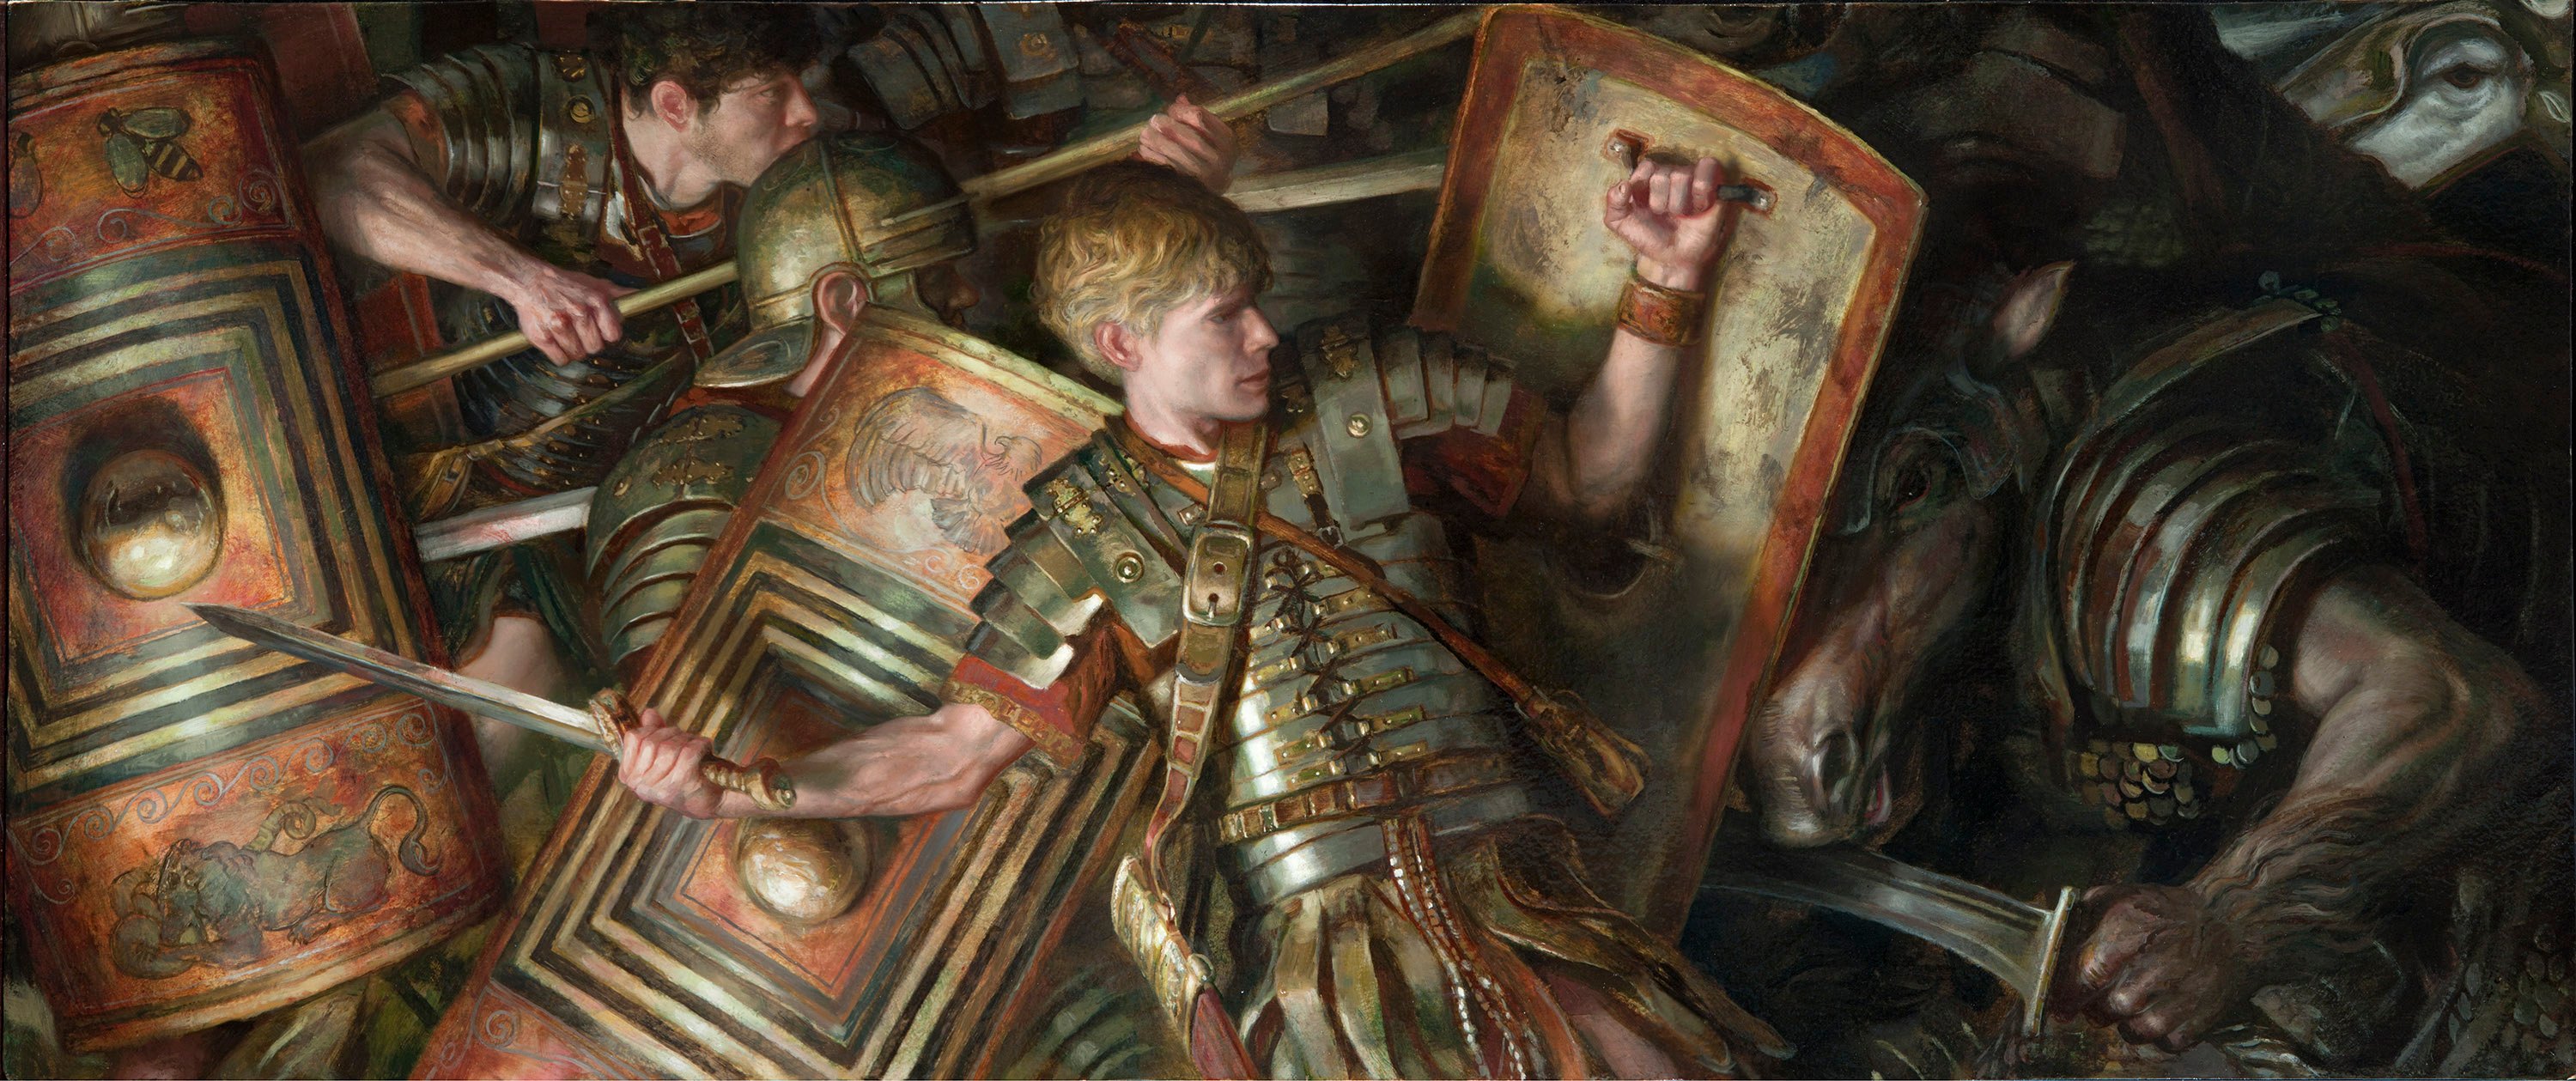 Roman Legionnaires
24" x 48"  Oil on Panel  2014
cover commission for Tor books for David Drake novel
private collection